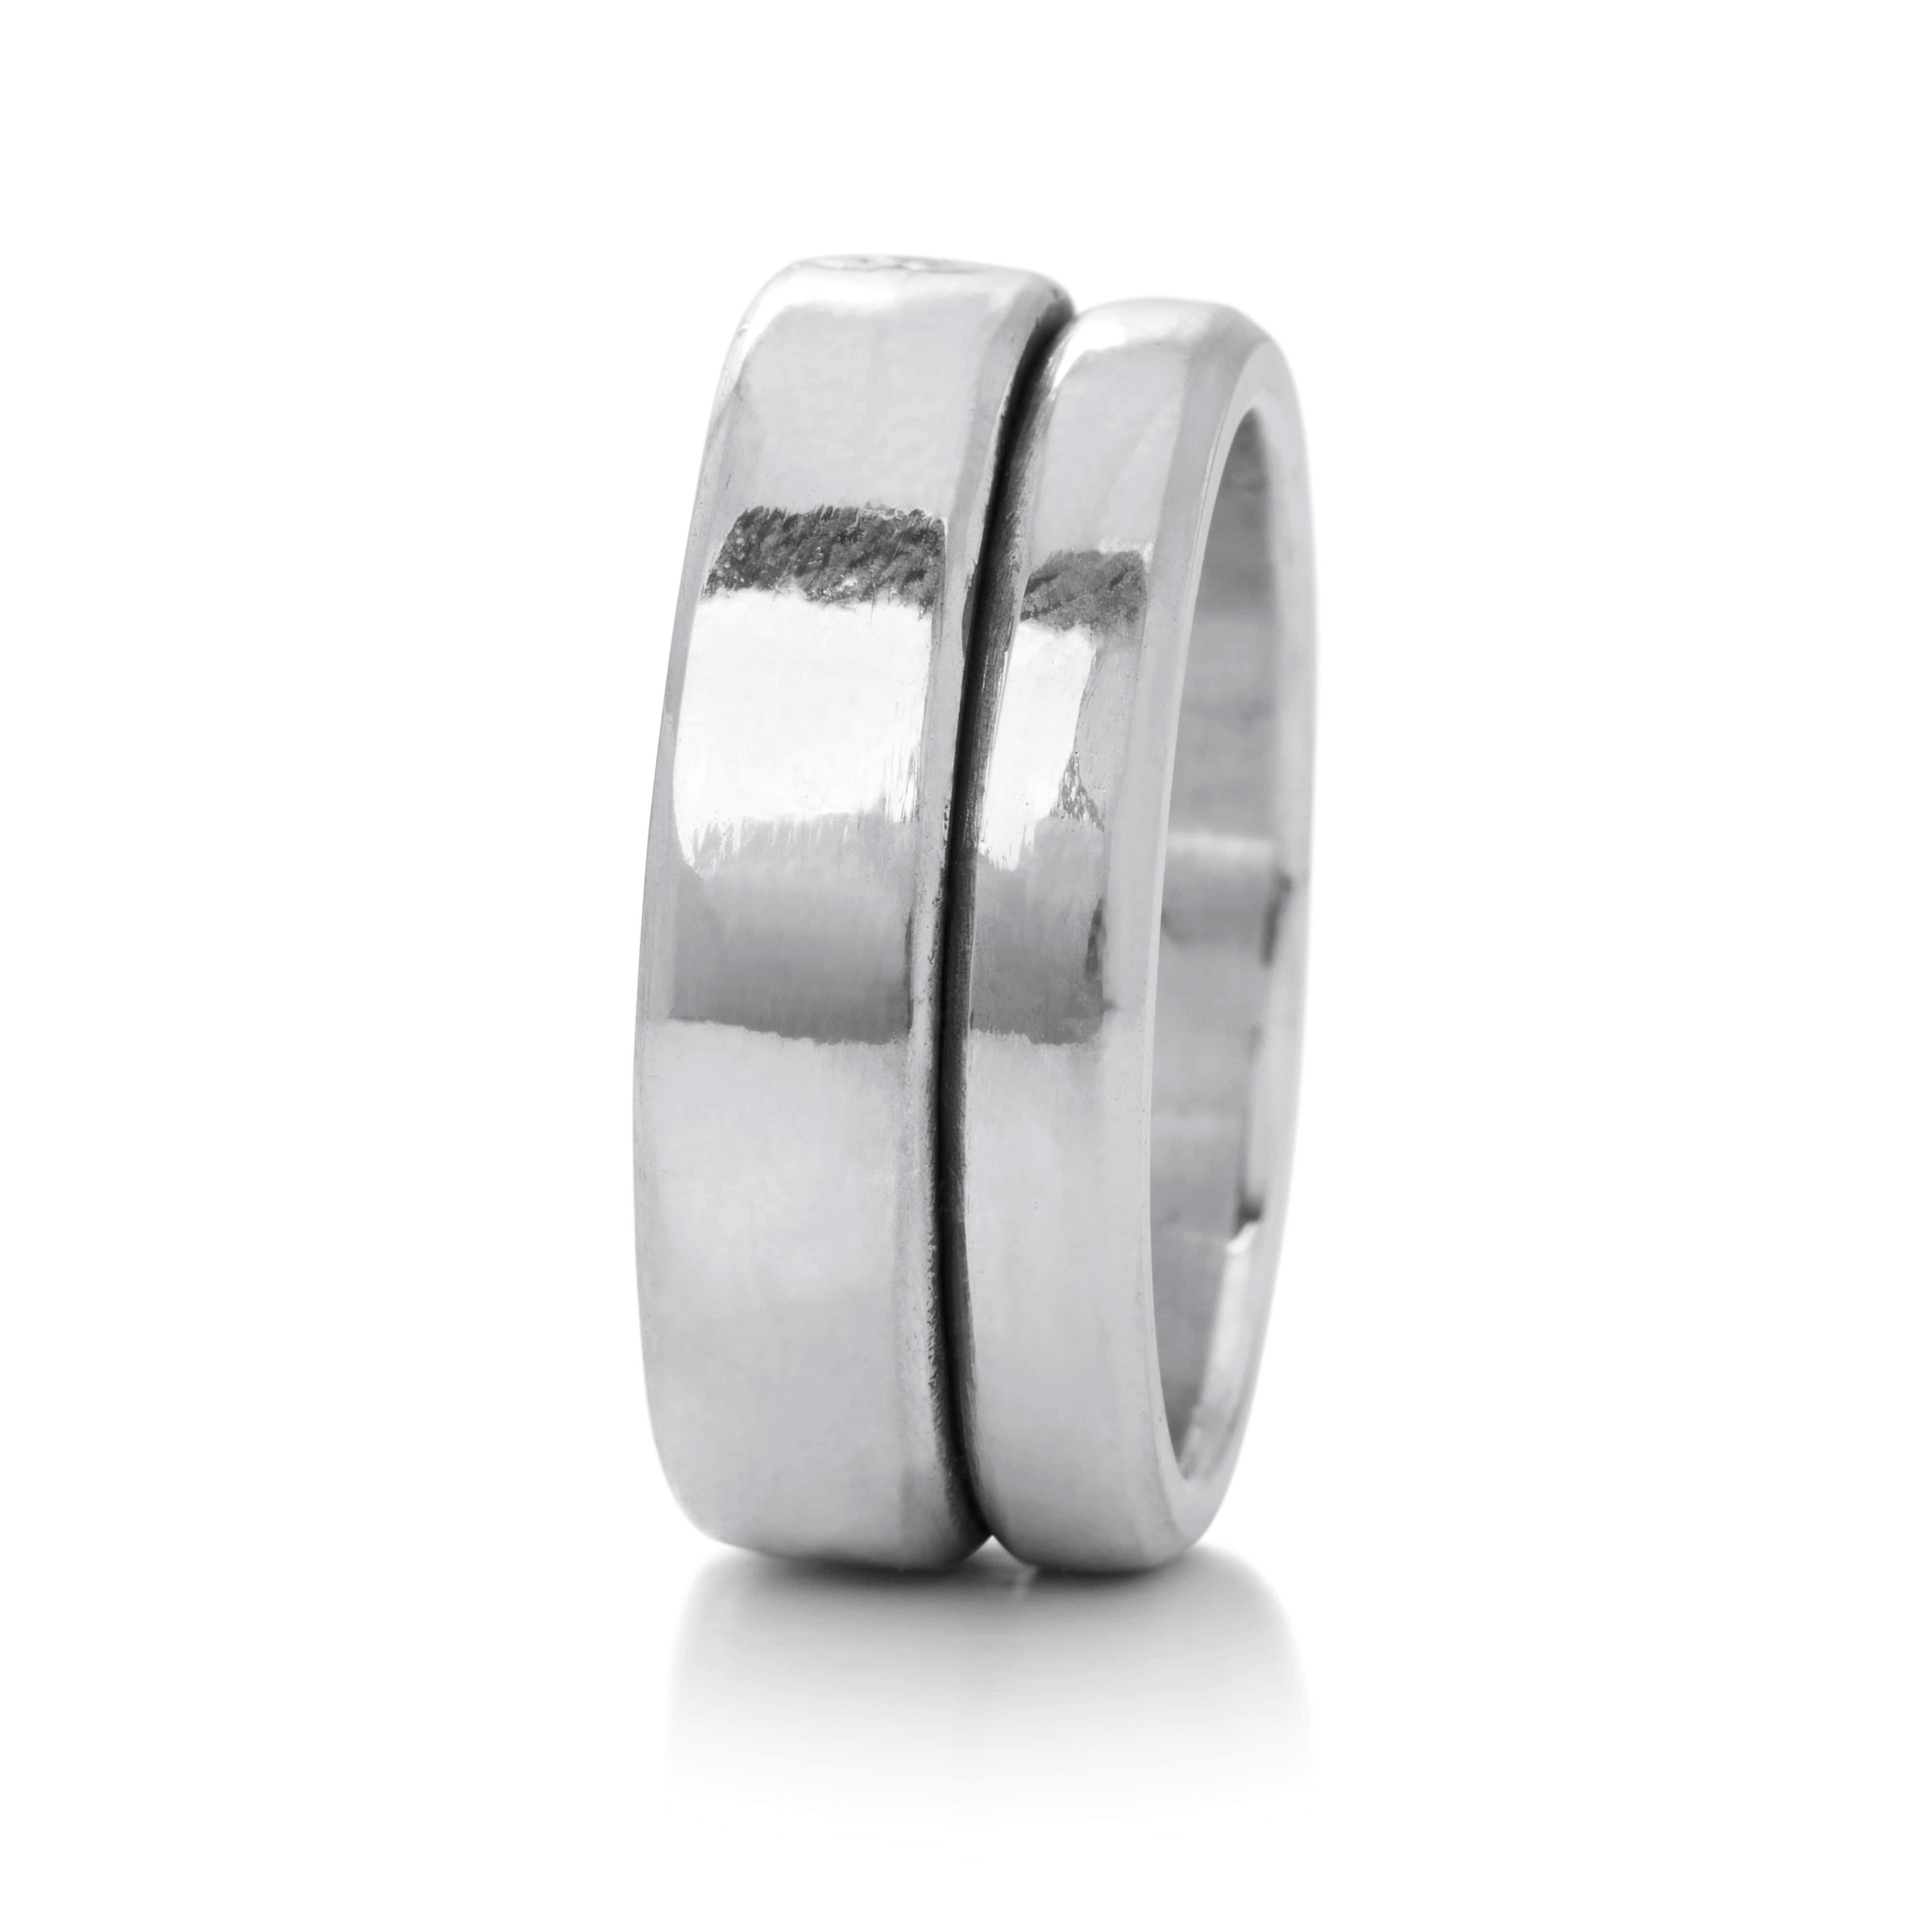 Solid Sterling Silver bands appearing to be fused together creating a large stacked ring band